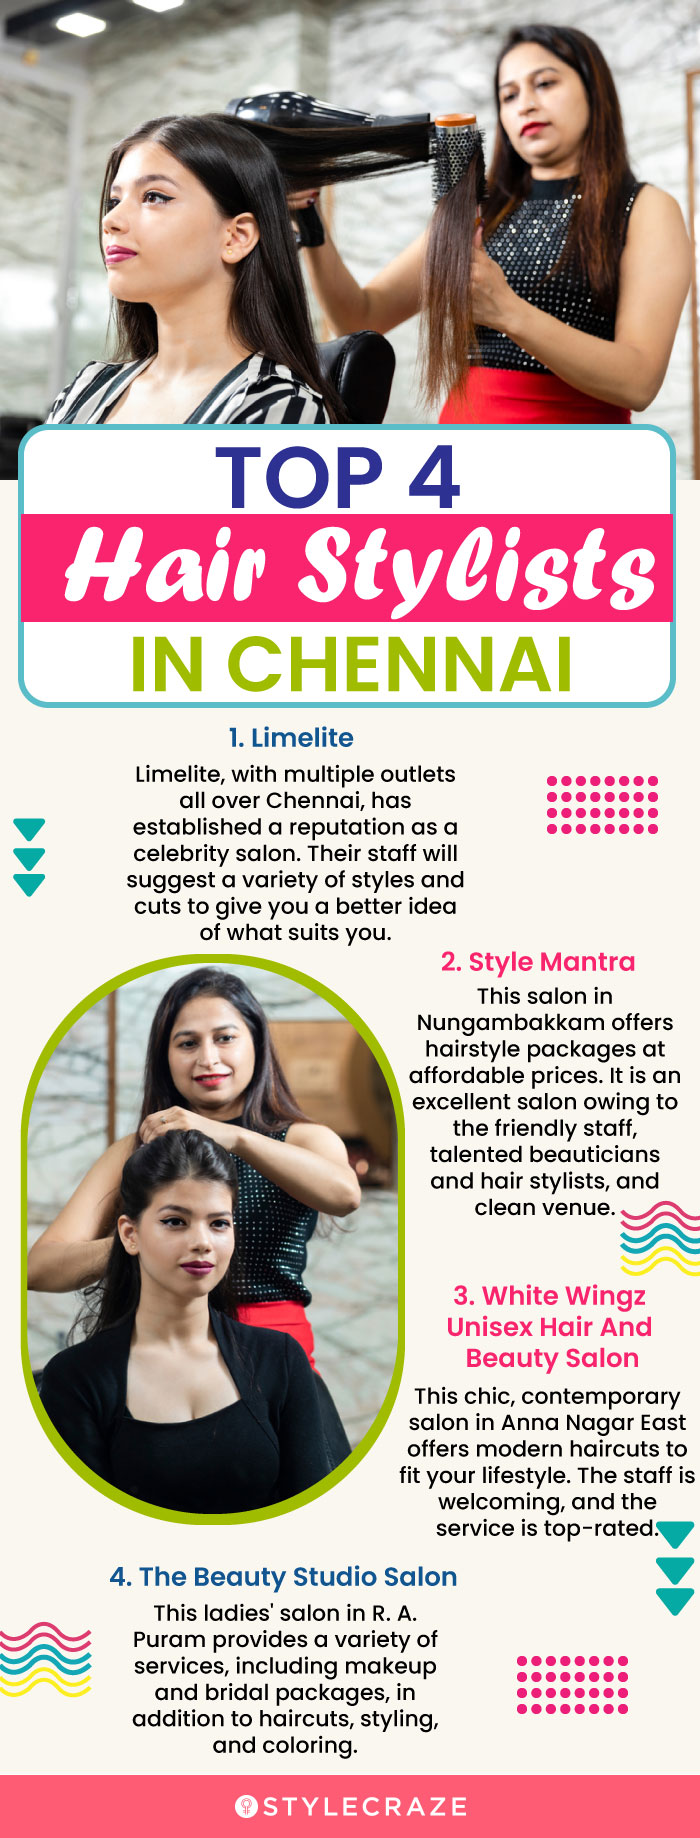 top 4 hair stylists in chennai (infographic)